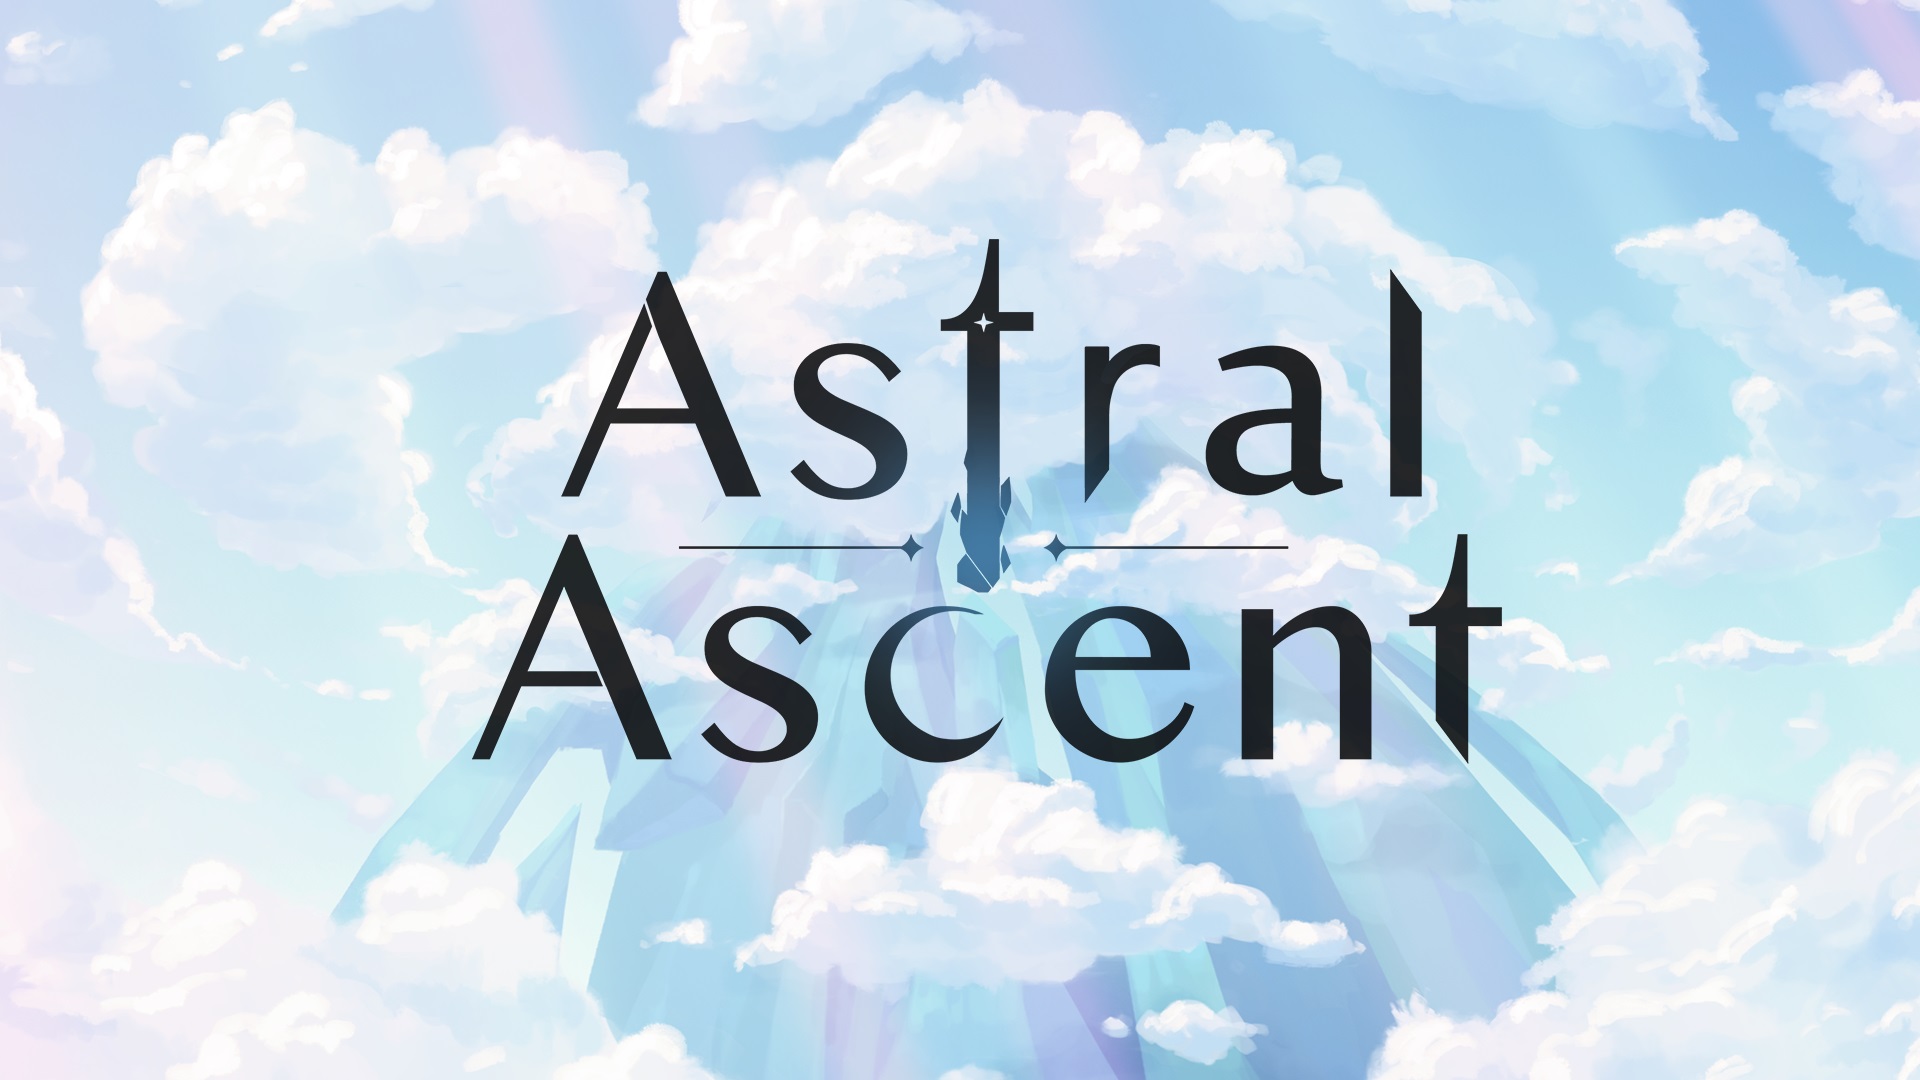 Video Game Astral Ascent HD Wallpaper | Background Image